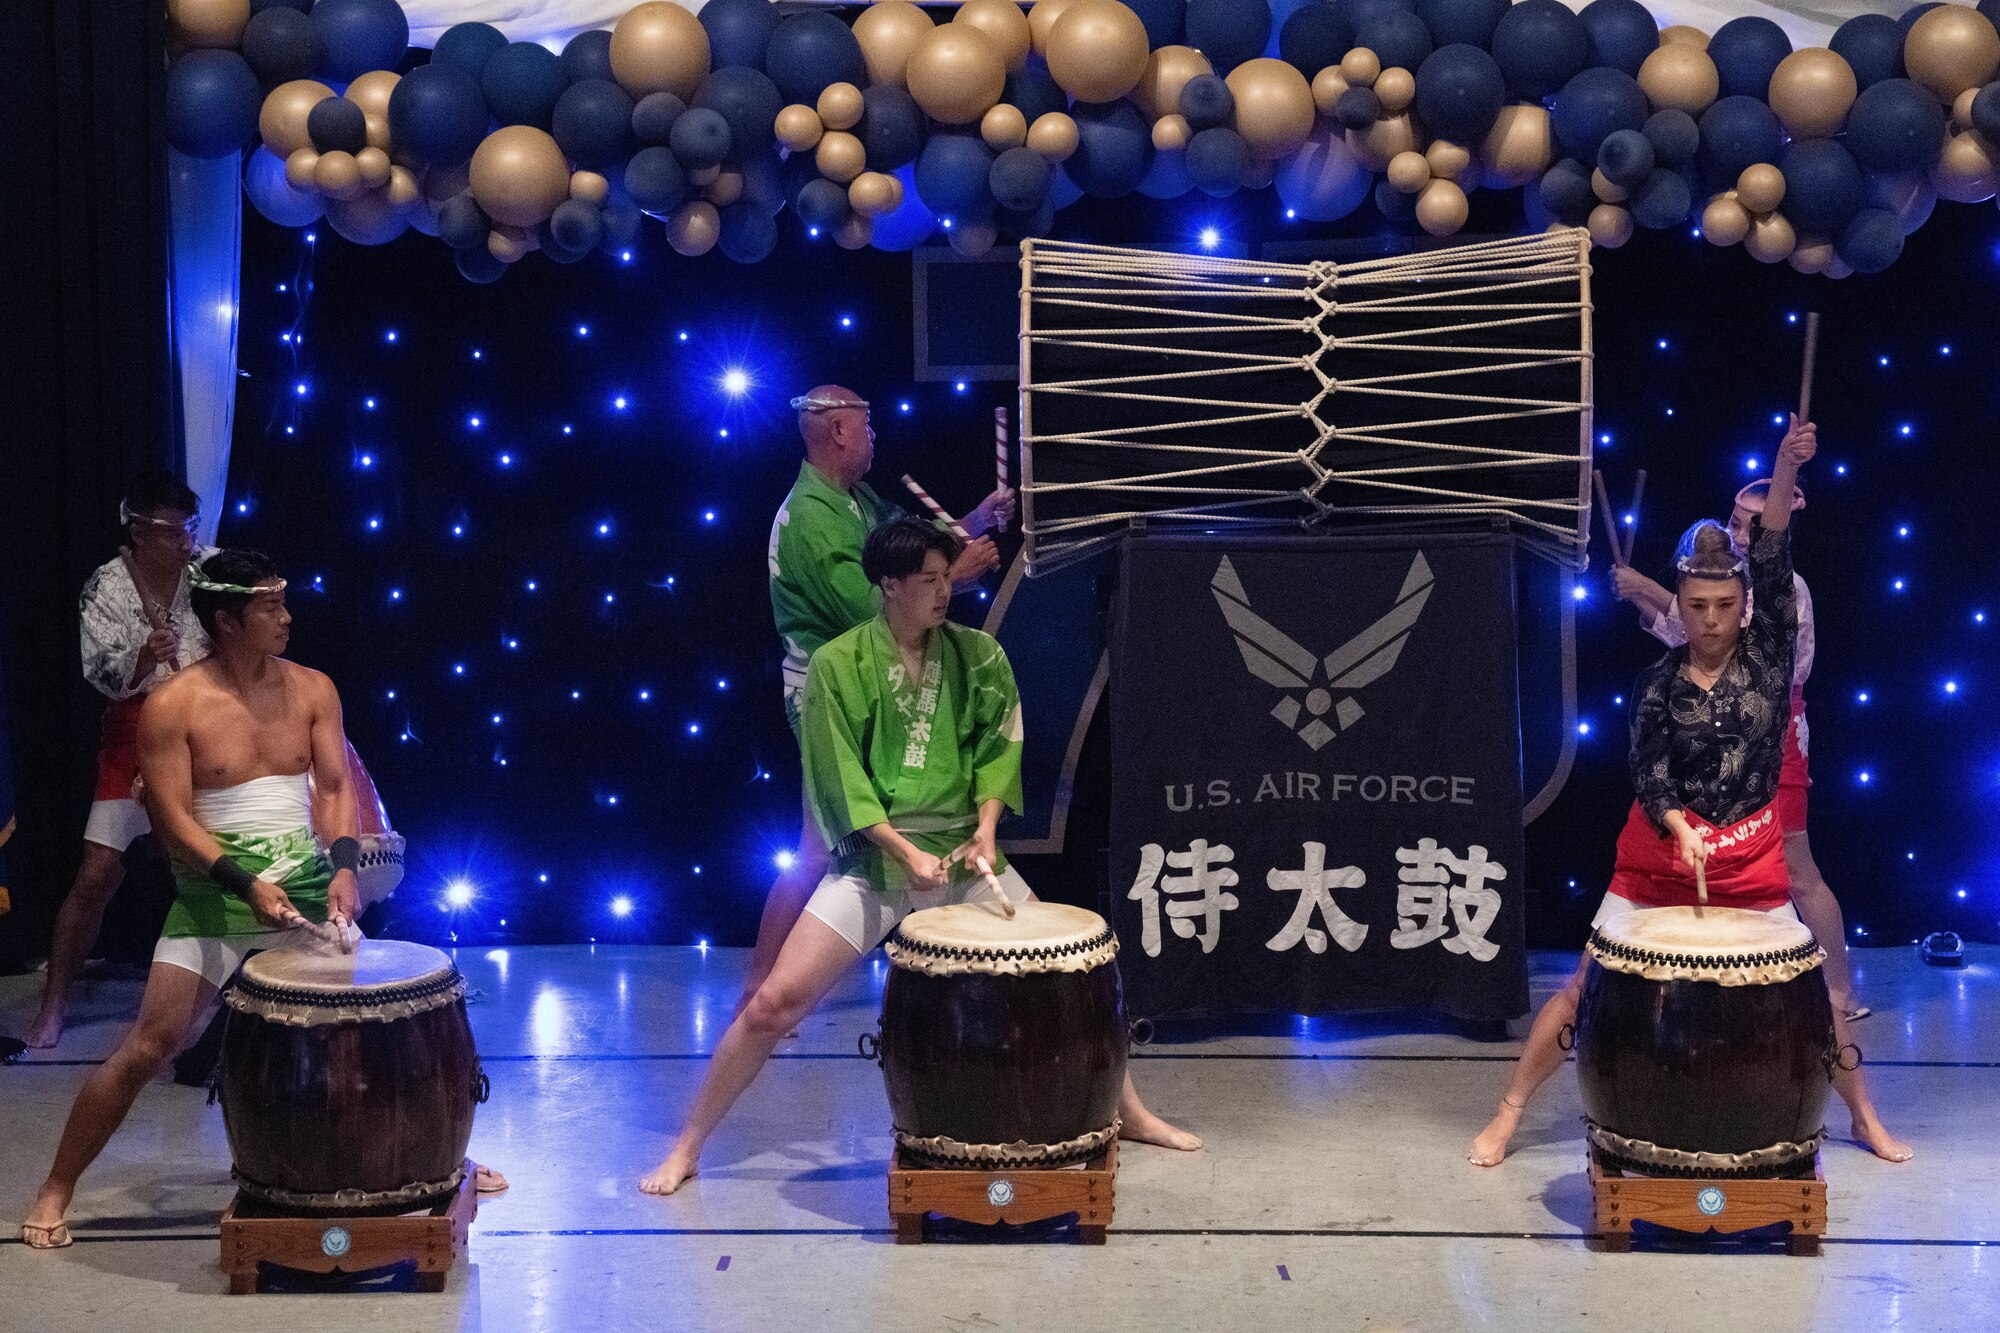 Taiko Drum teams give a joint performance